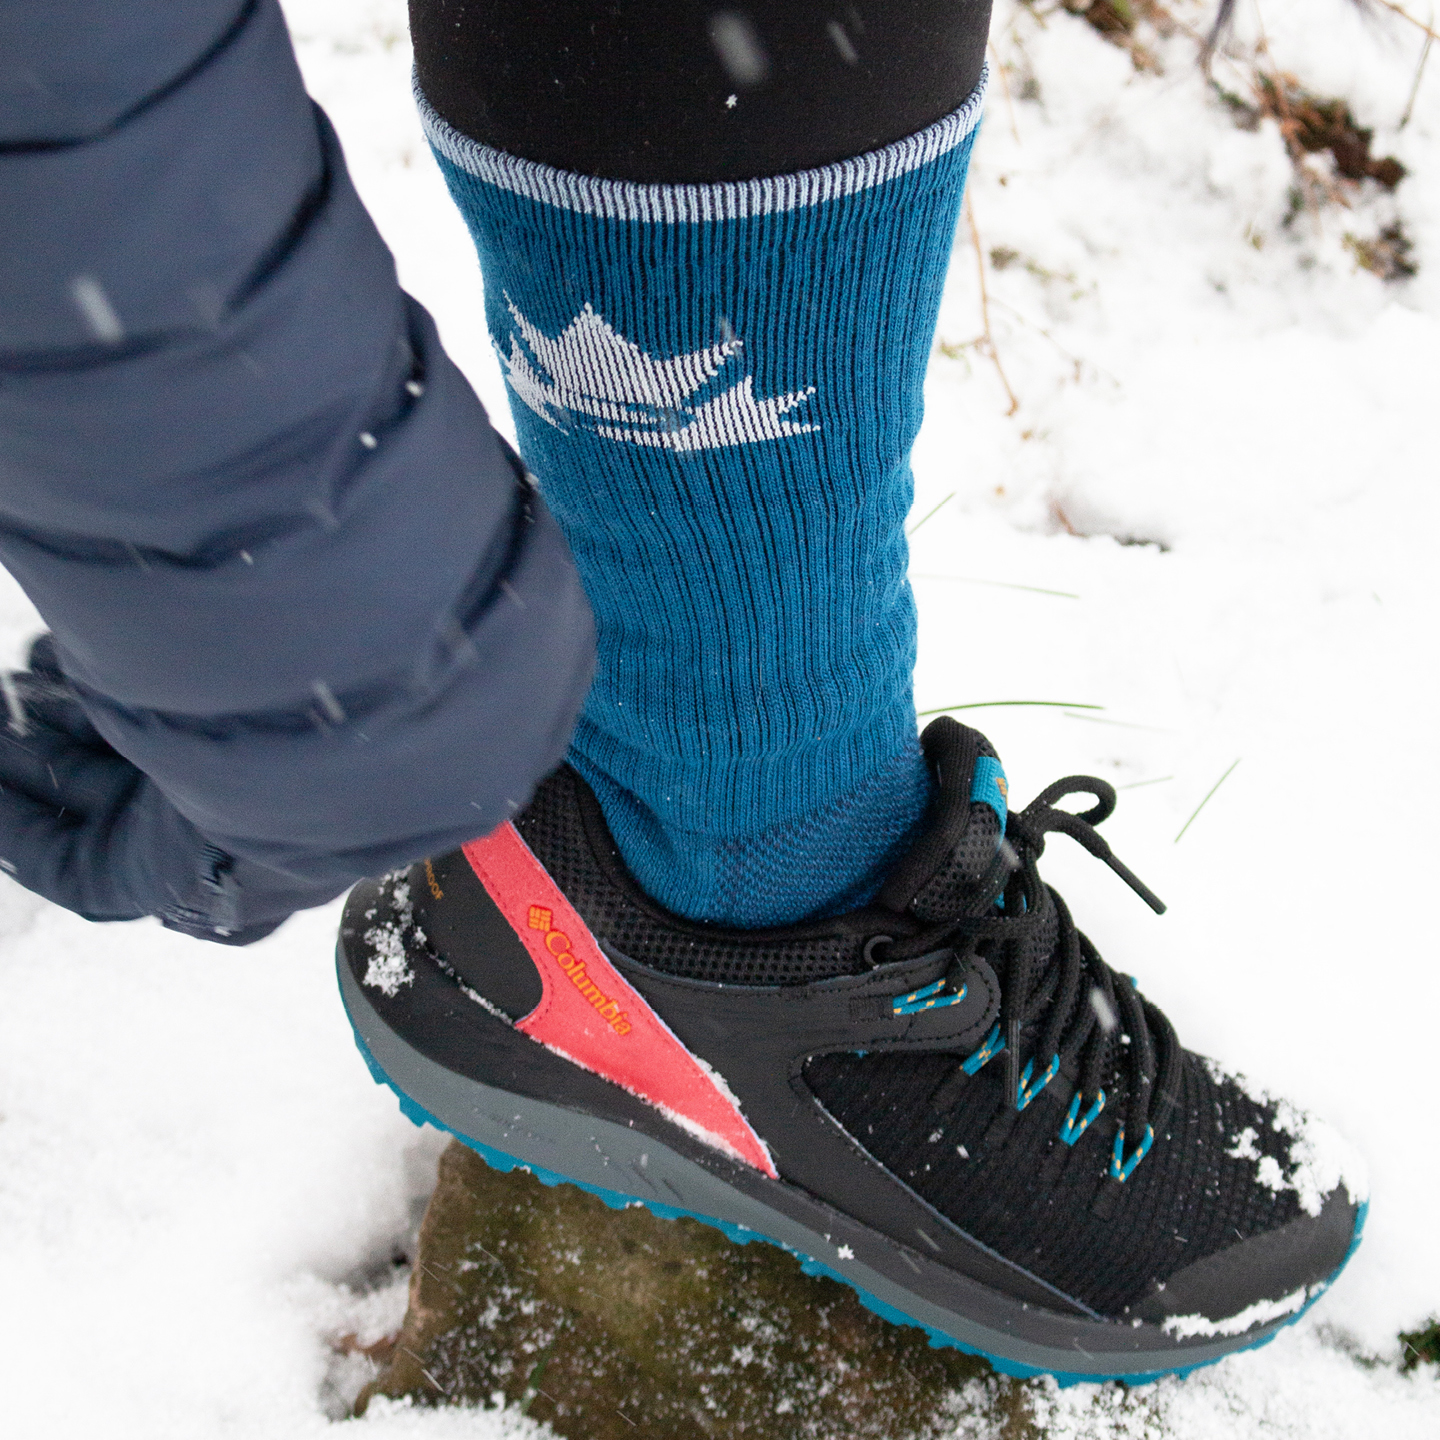 Trans Canada Trail | Step Forward in New Socks to Support the Trail